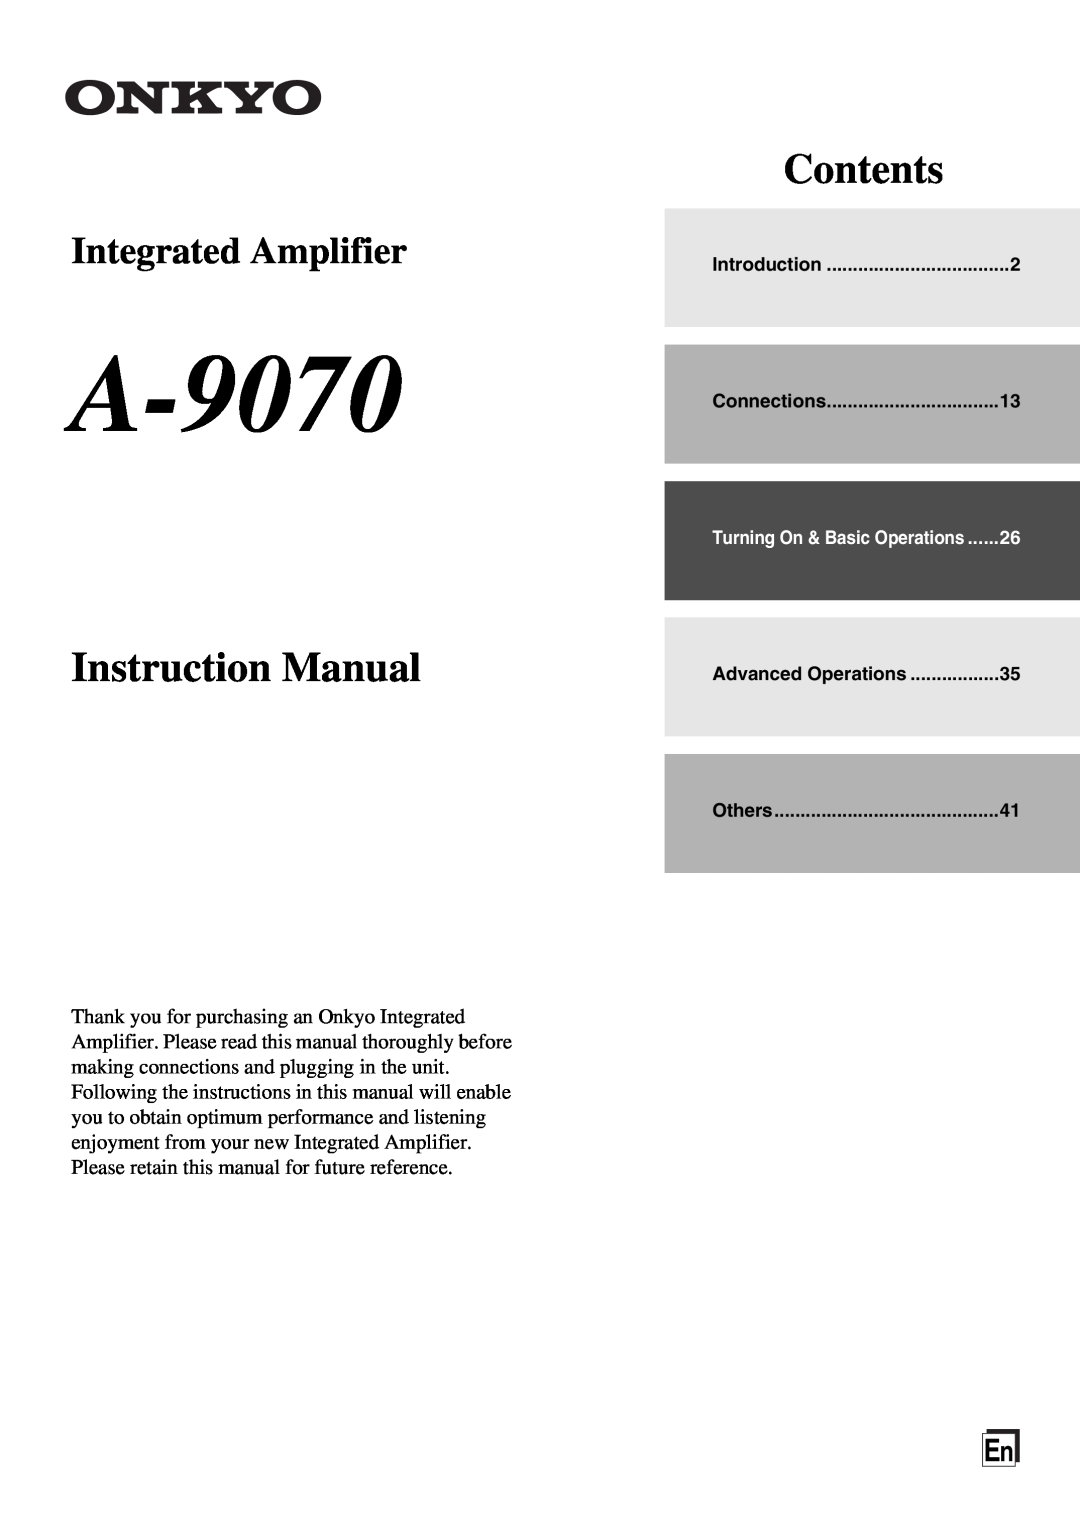 Onkyo A-9070 instruction manual Contents, Integrated Amplifier 